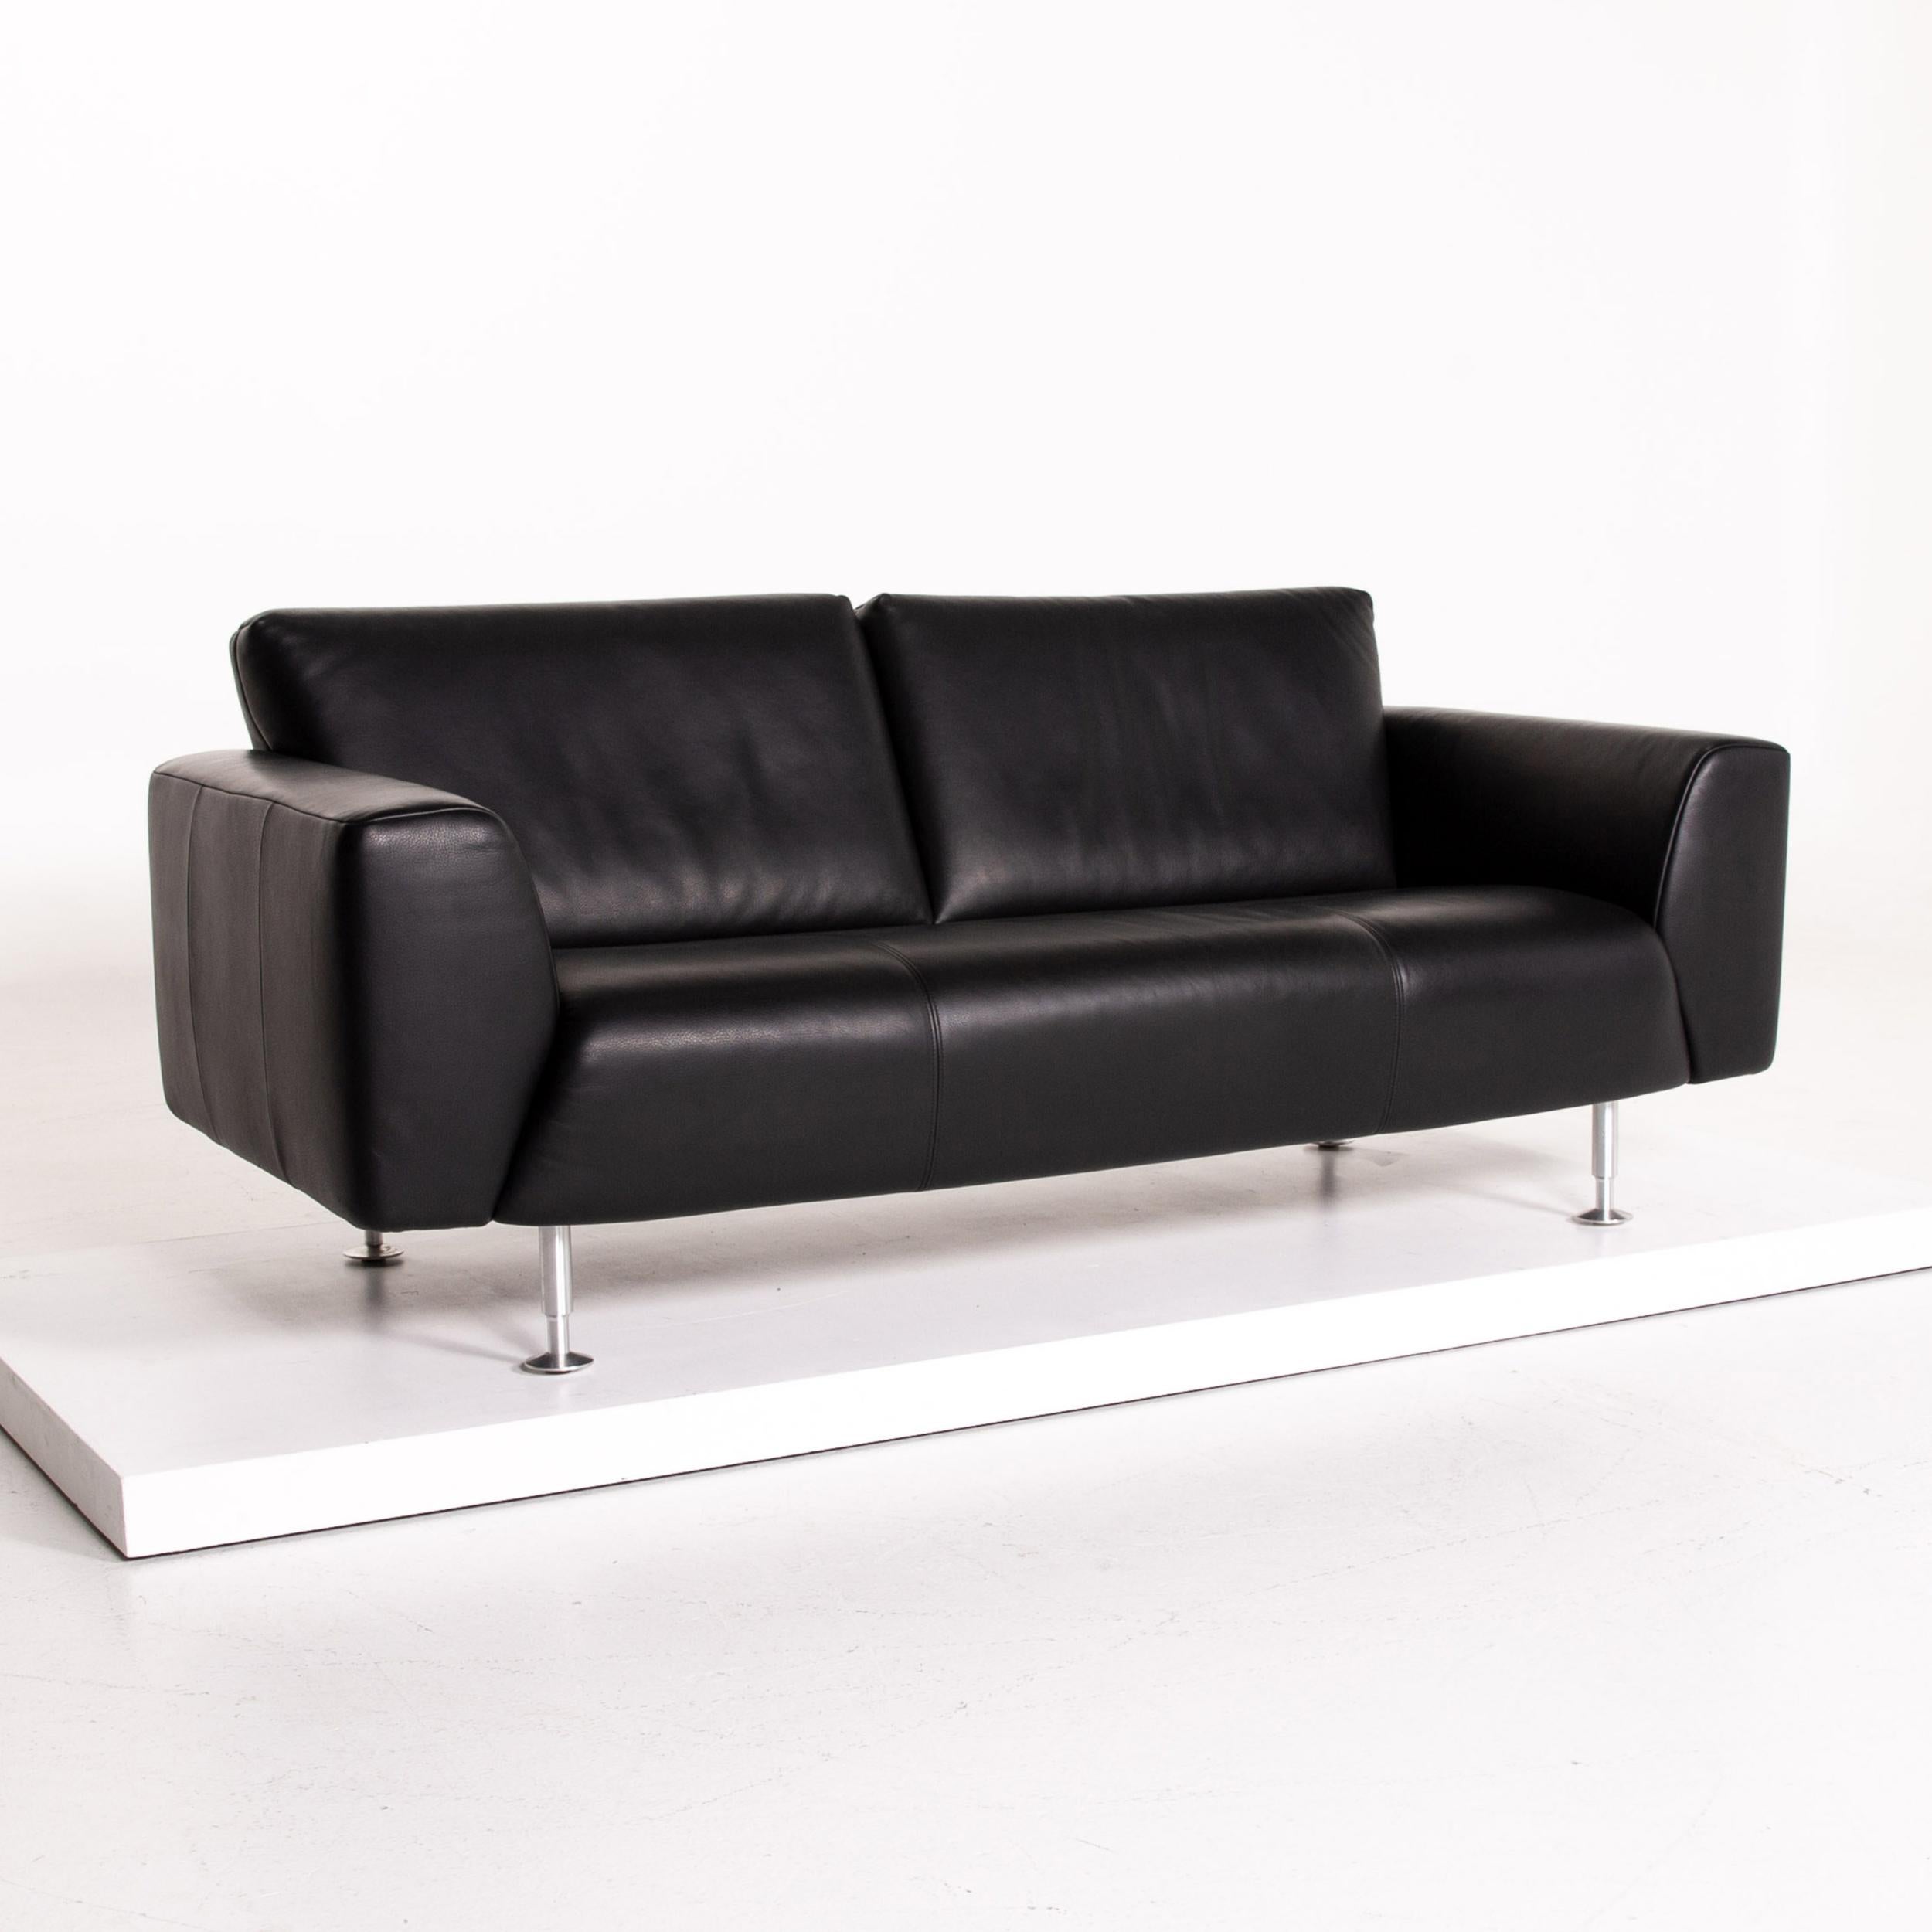 Contemporary Rolf Benz Leather Sofa Black Three-Seat Couch For Sale